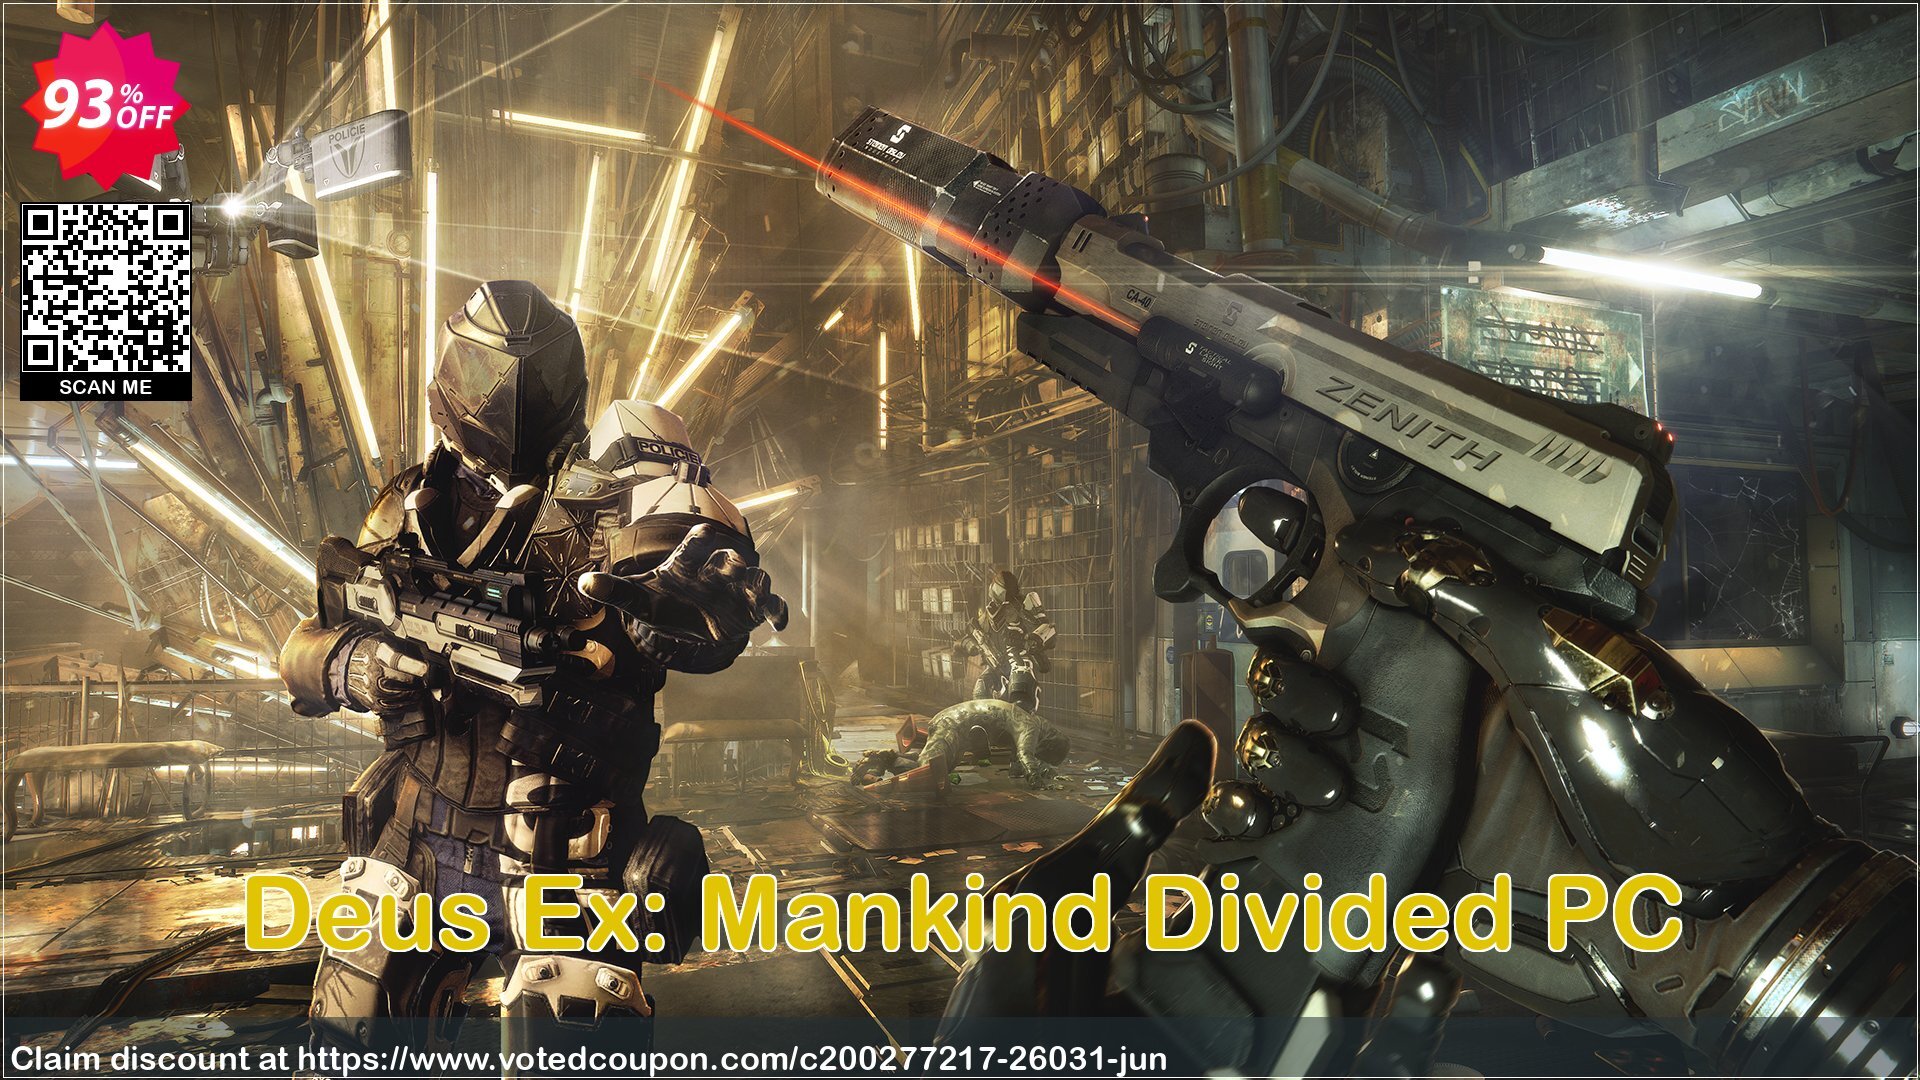 Deus Ex: Mankind Divided PC Coupon Code May 2024, 93% OFF - VotedCoupon